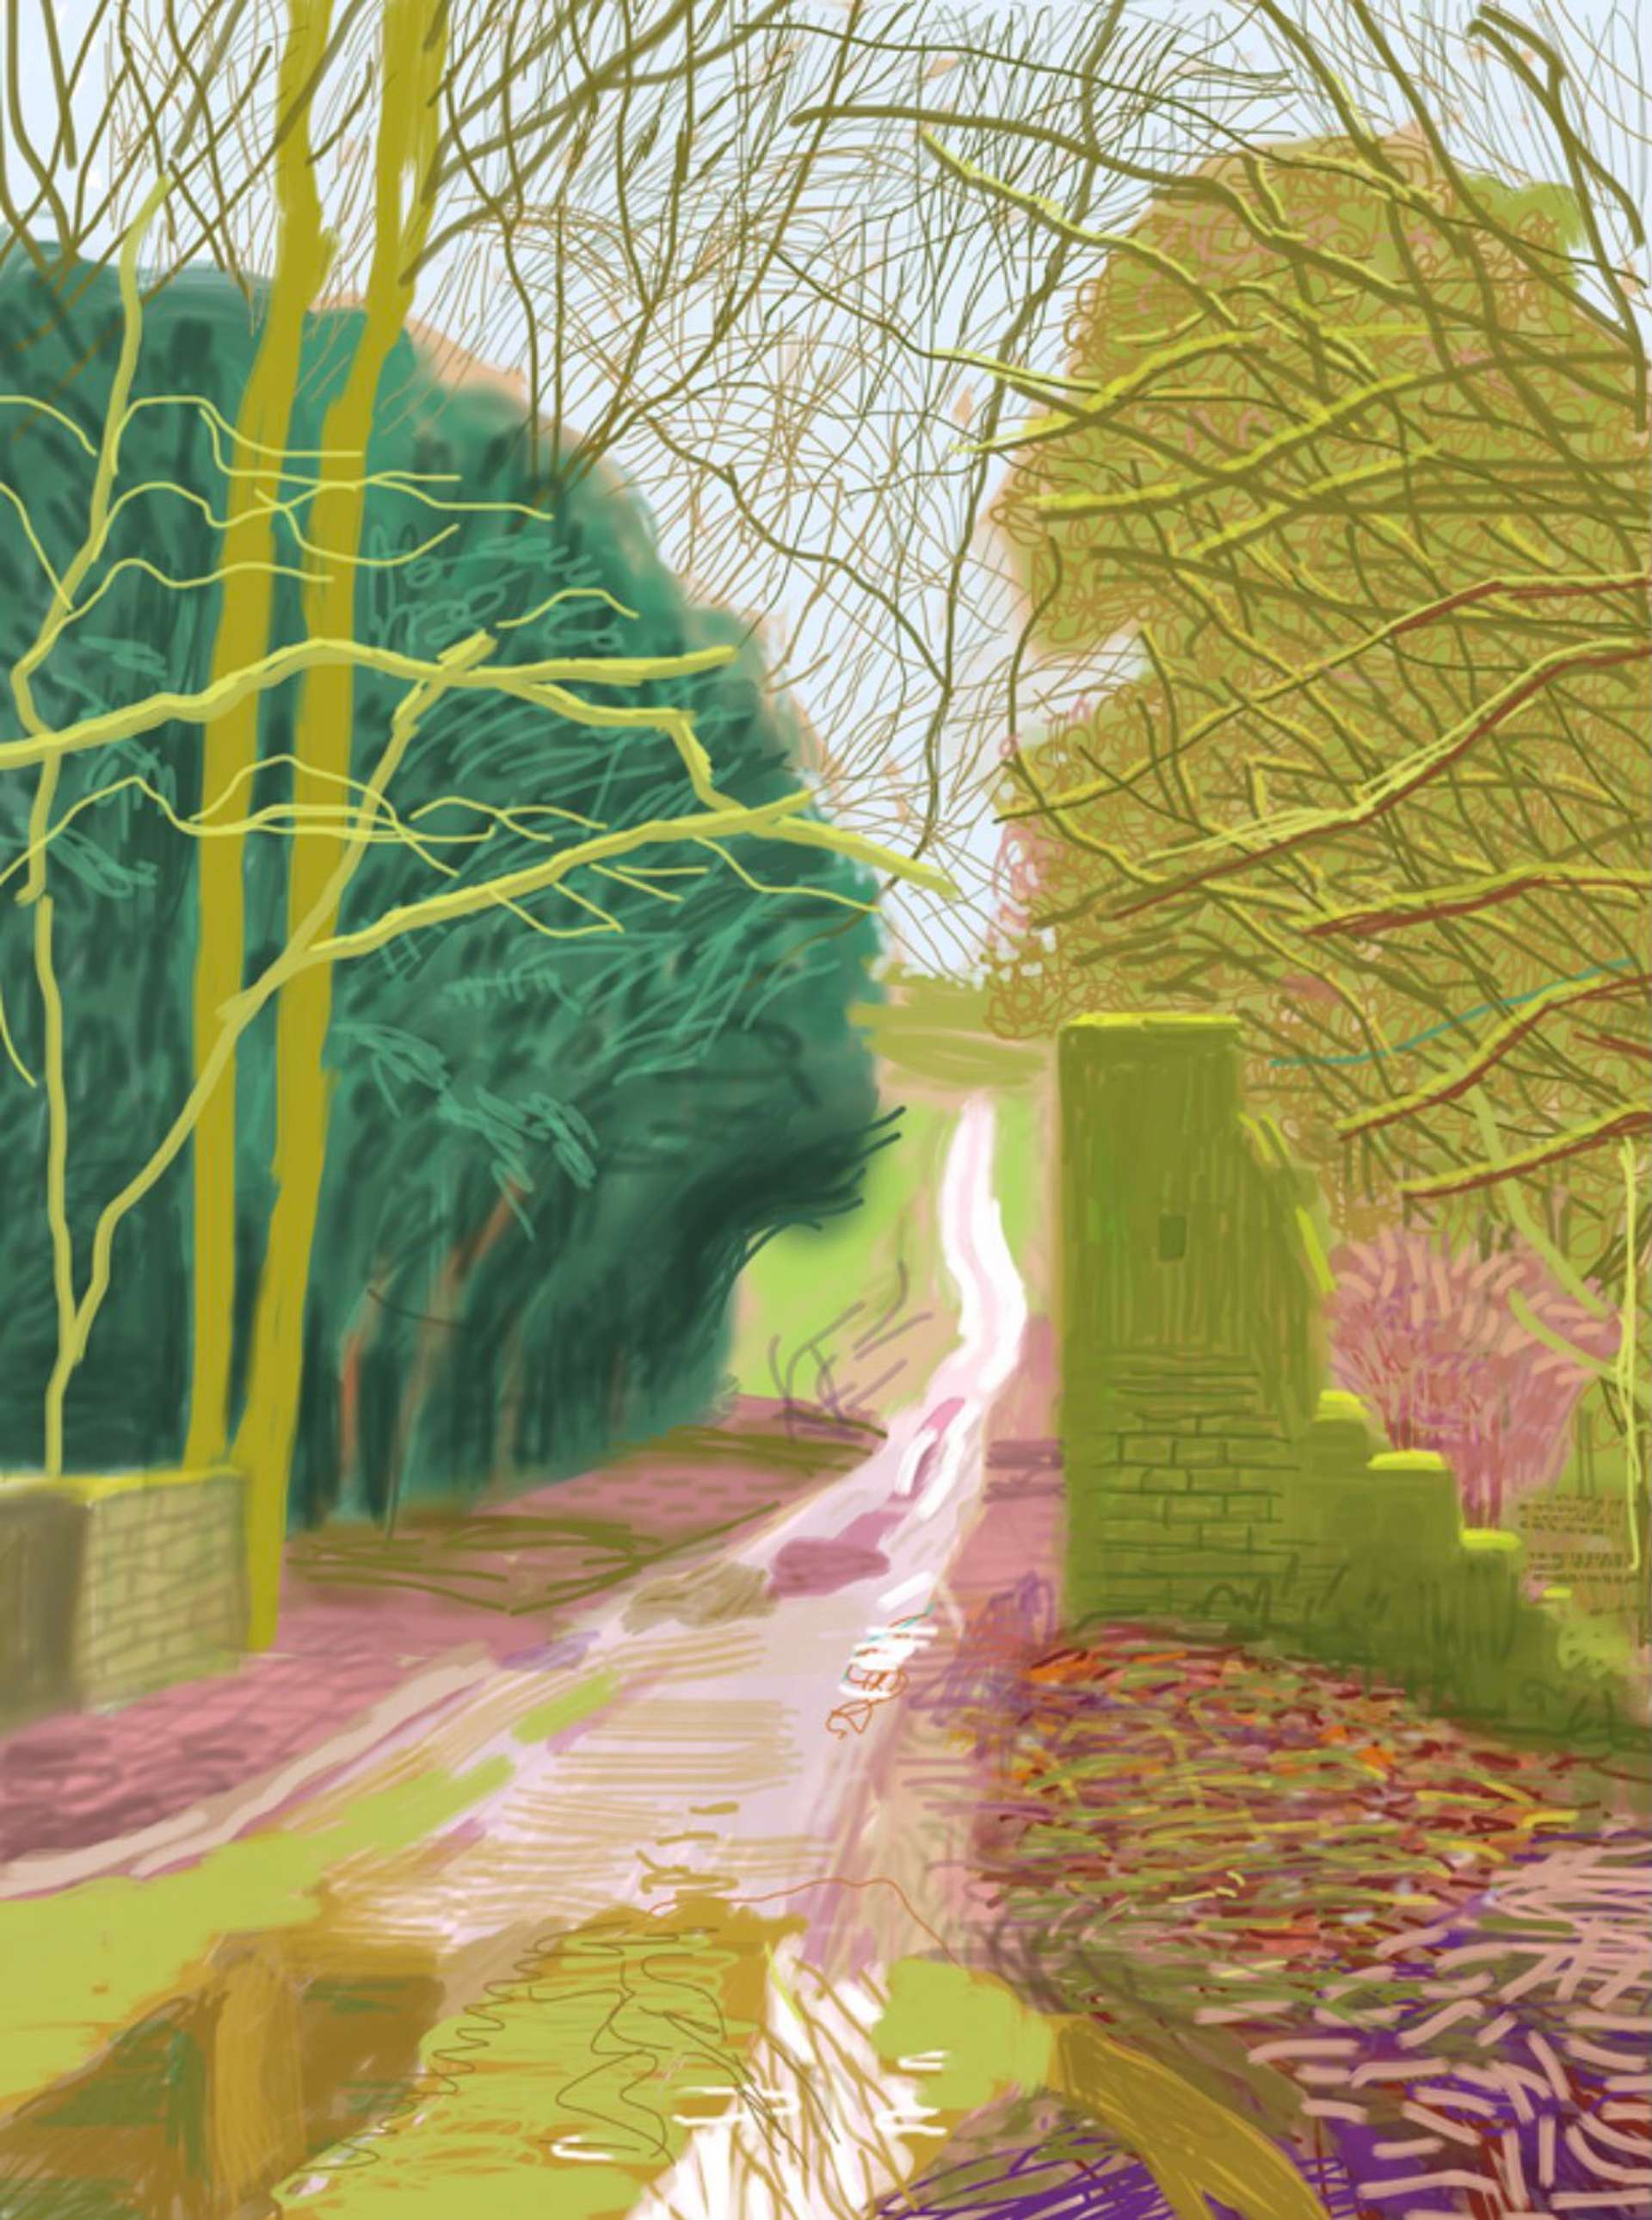 The Arrival Of Spring In Woldgate East Yorkshire 29th January 2011 - Signed Print by David Hockney 2011 - MyArtBroker